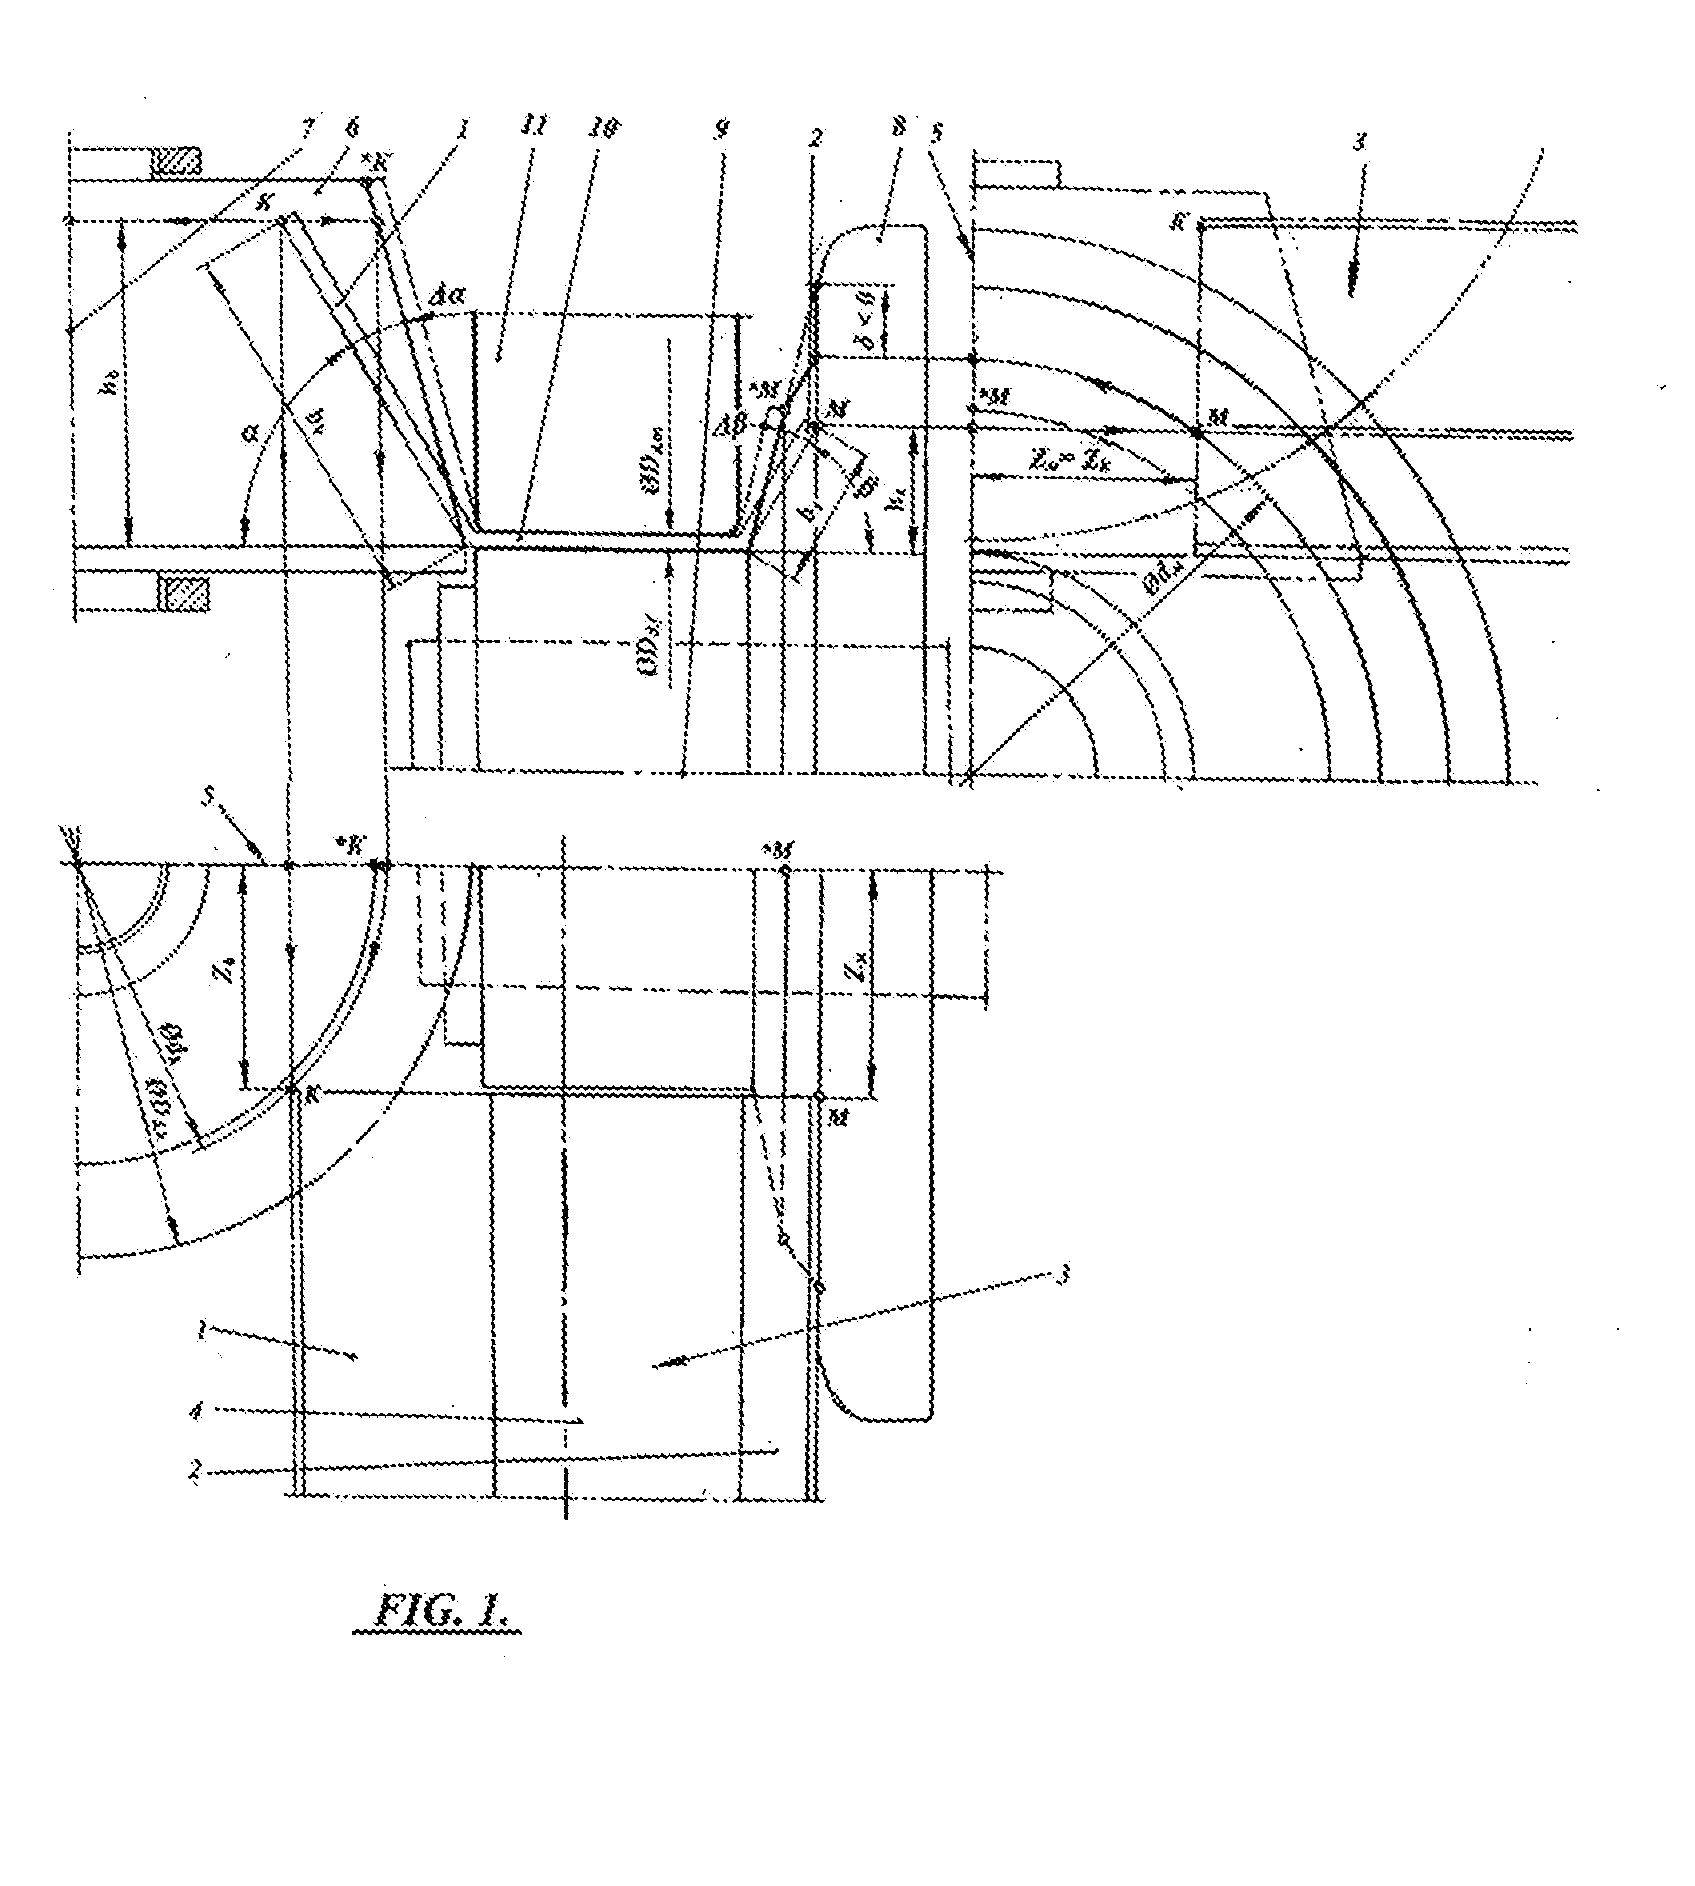 Method and Apparatus for Manufacturing Asymmetrical Roll-Formed Sections